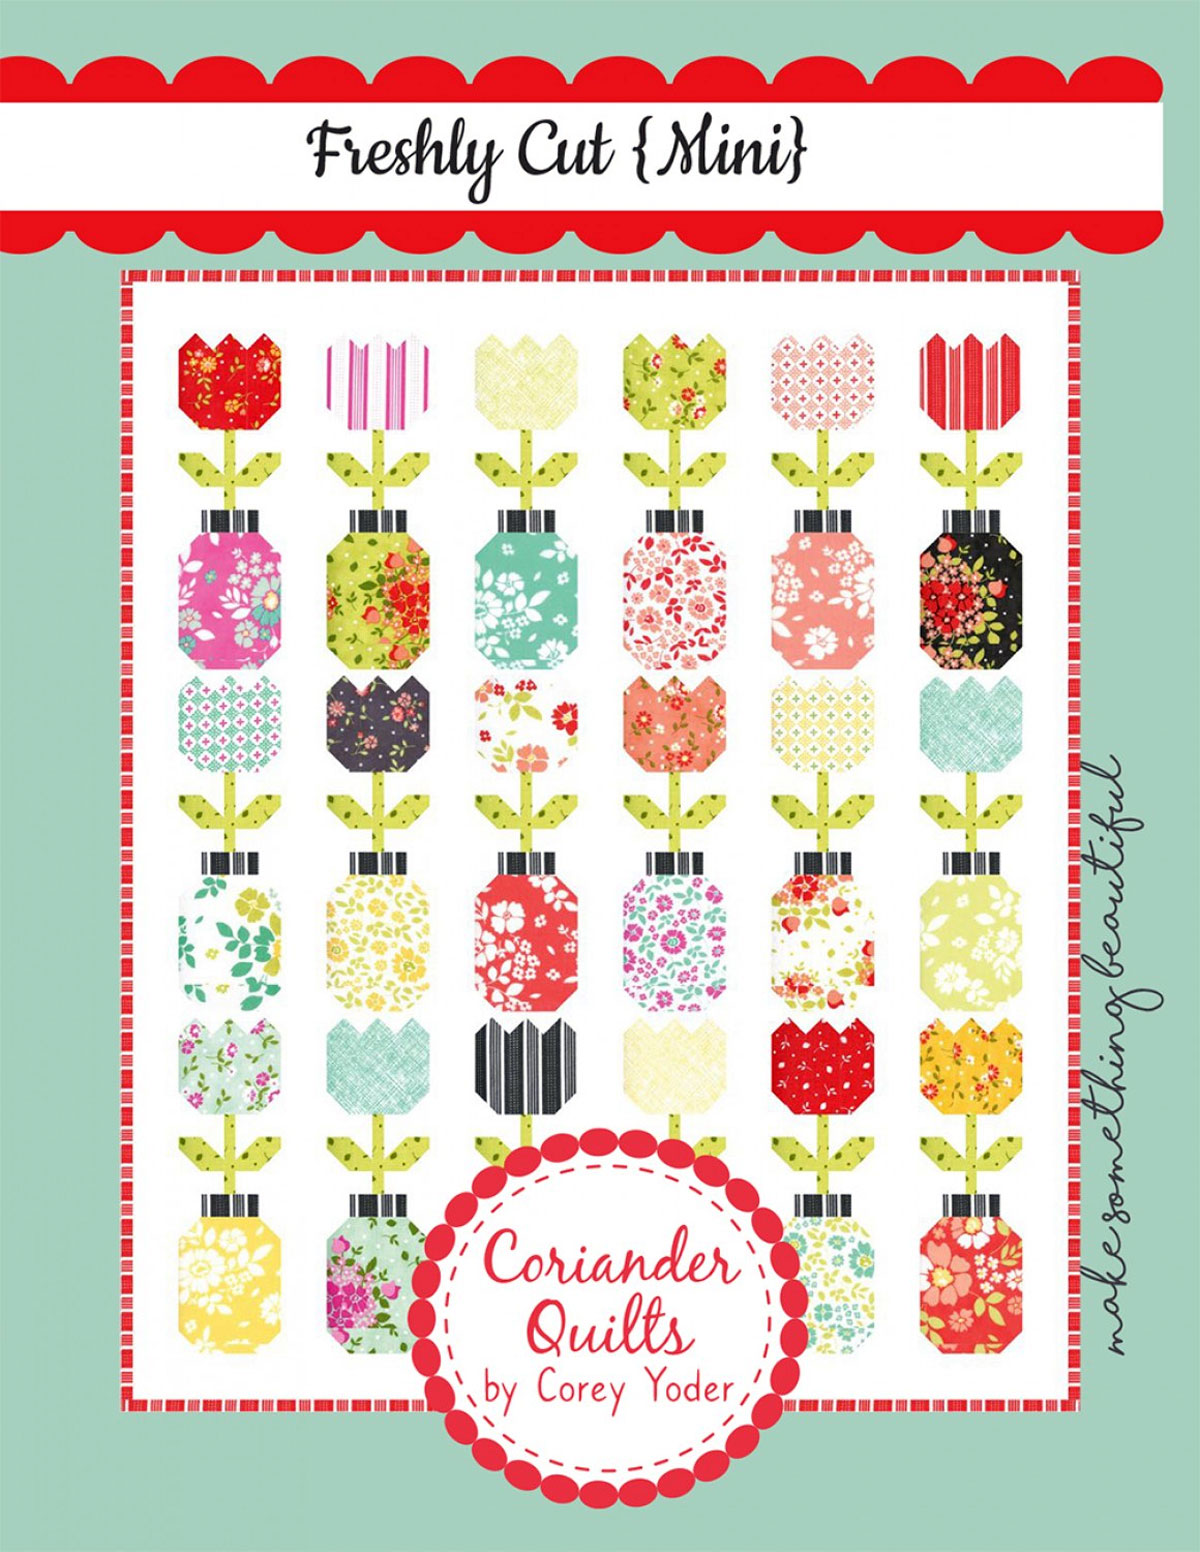 Freshly-Cut-Mini-quilt-sewing-pattern-Coriander-Quilts-front